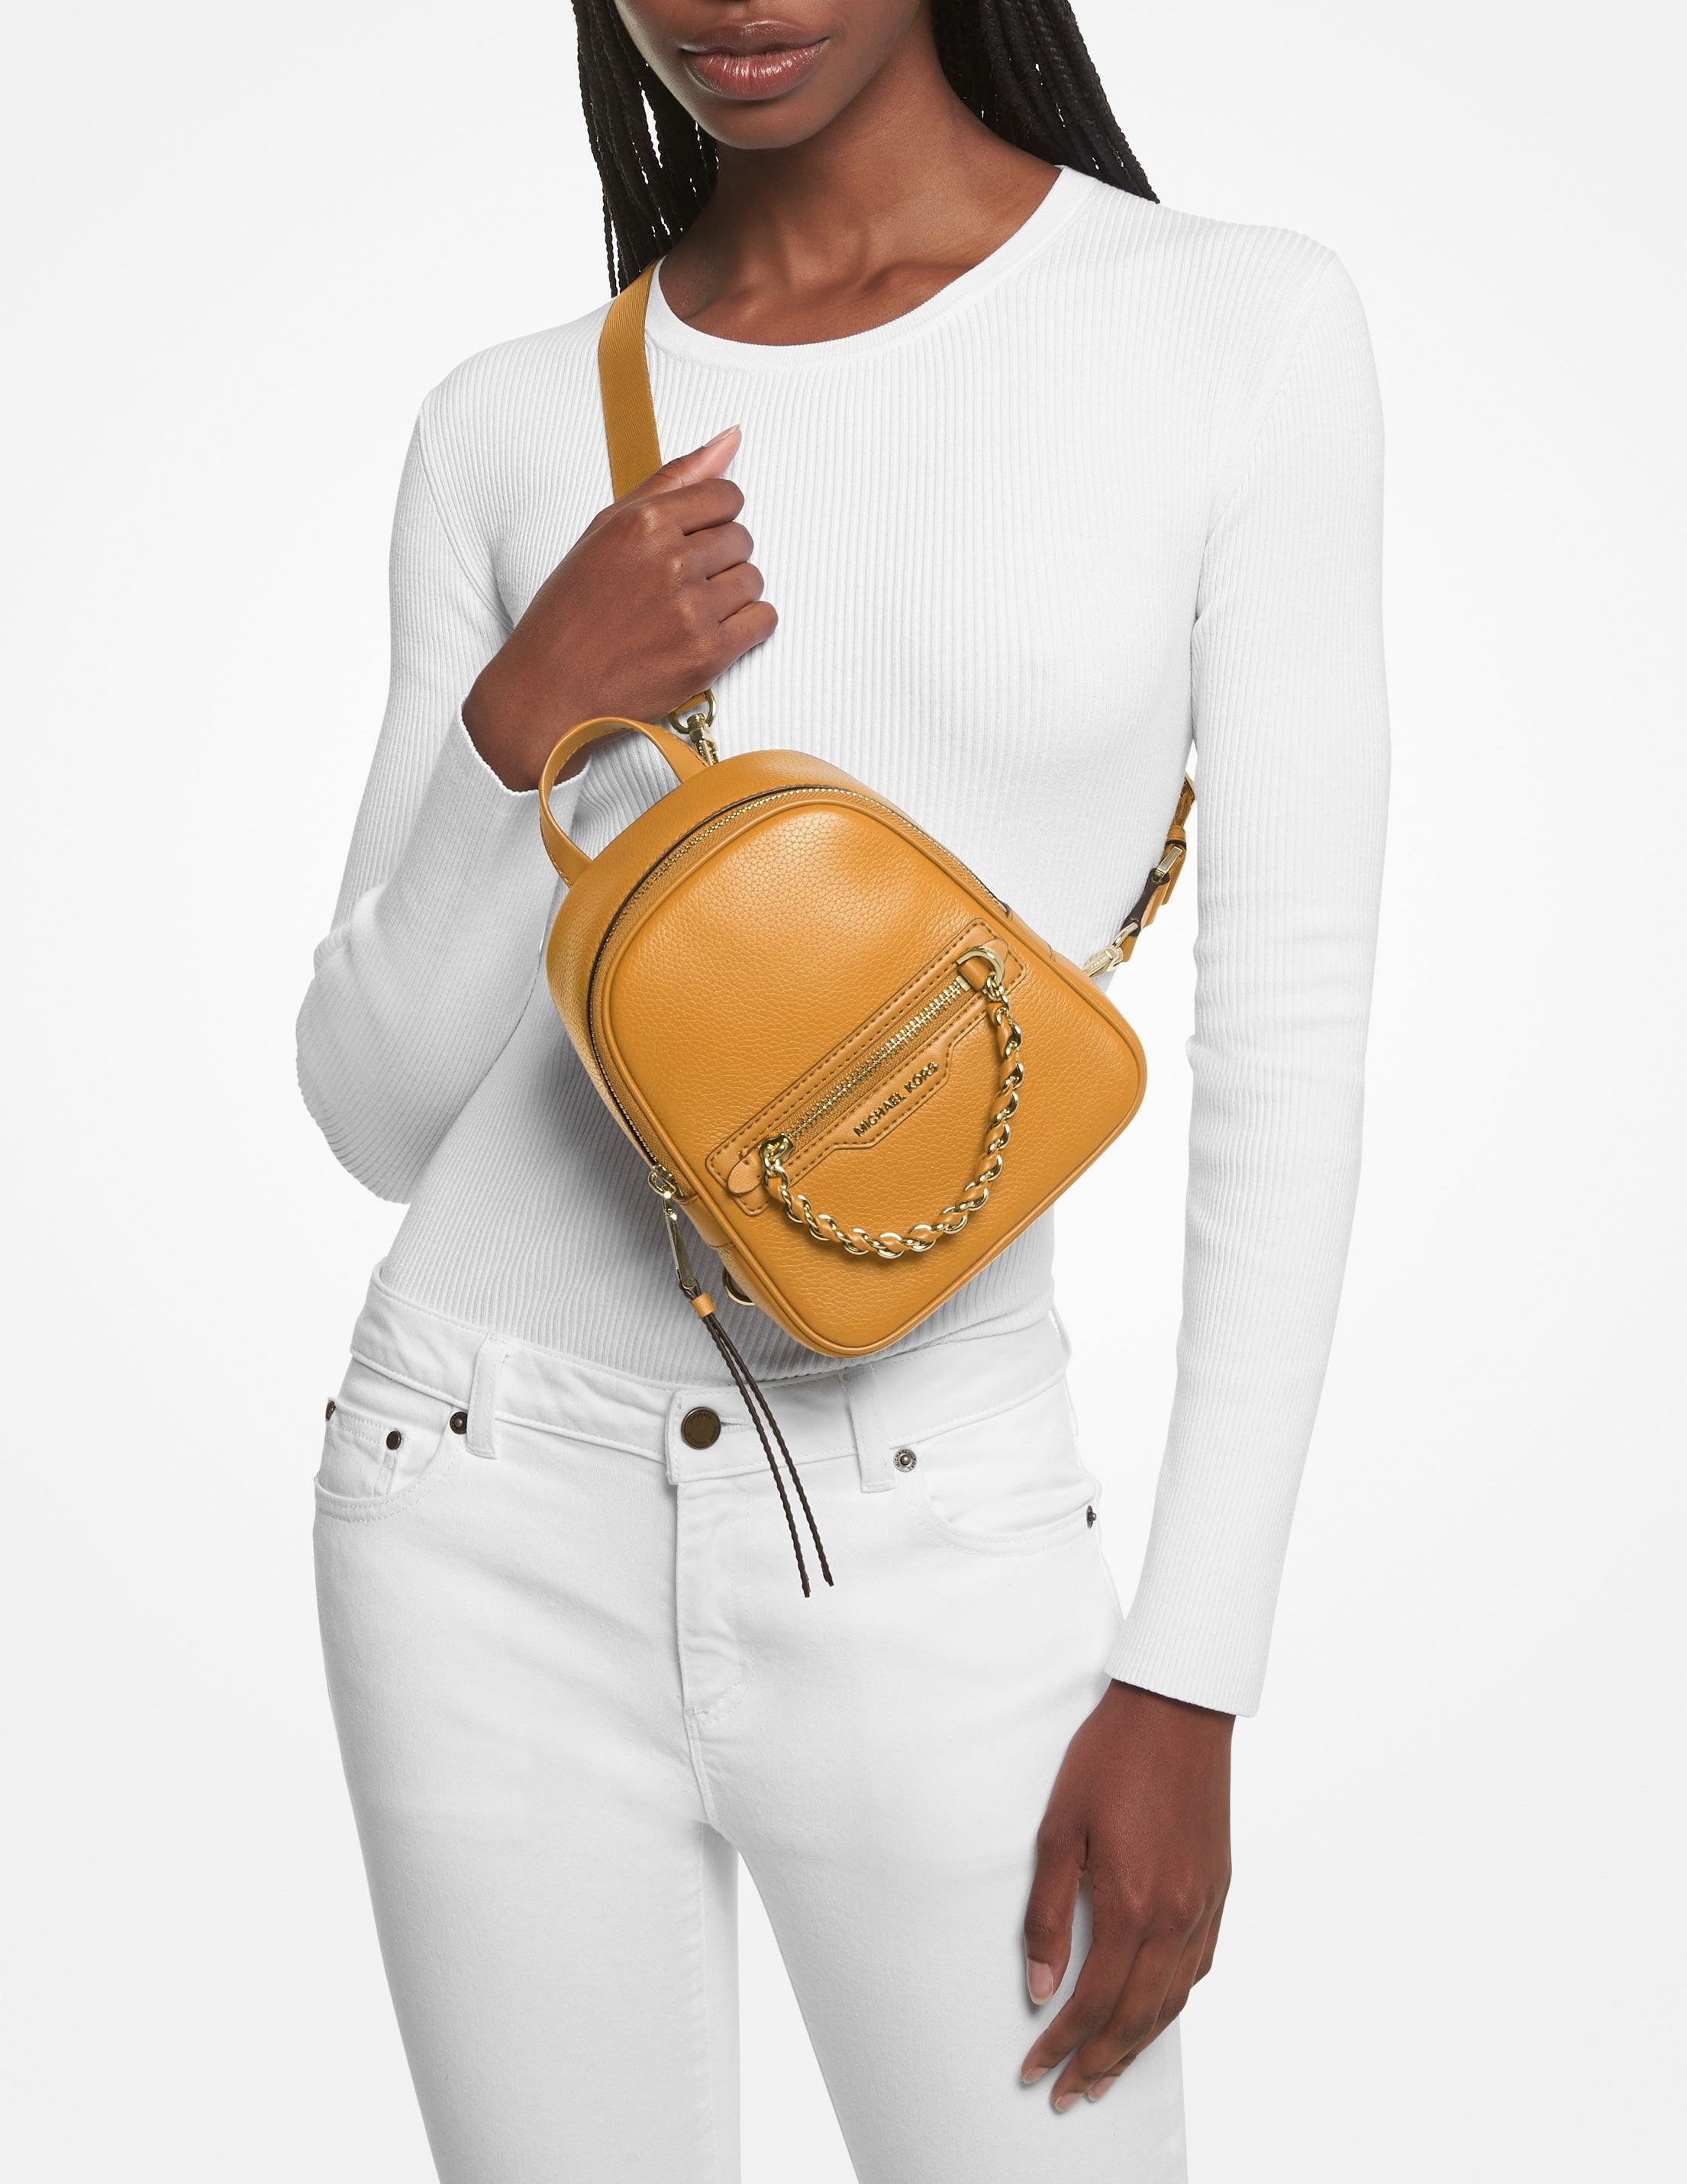 BALO MK NỮ MICHAEL KORS ELLIOT EXTRA SMALL YELLOW LEATHER BACKPACK 30F3G5EB0L878 5